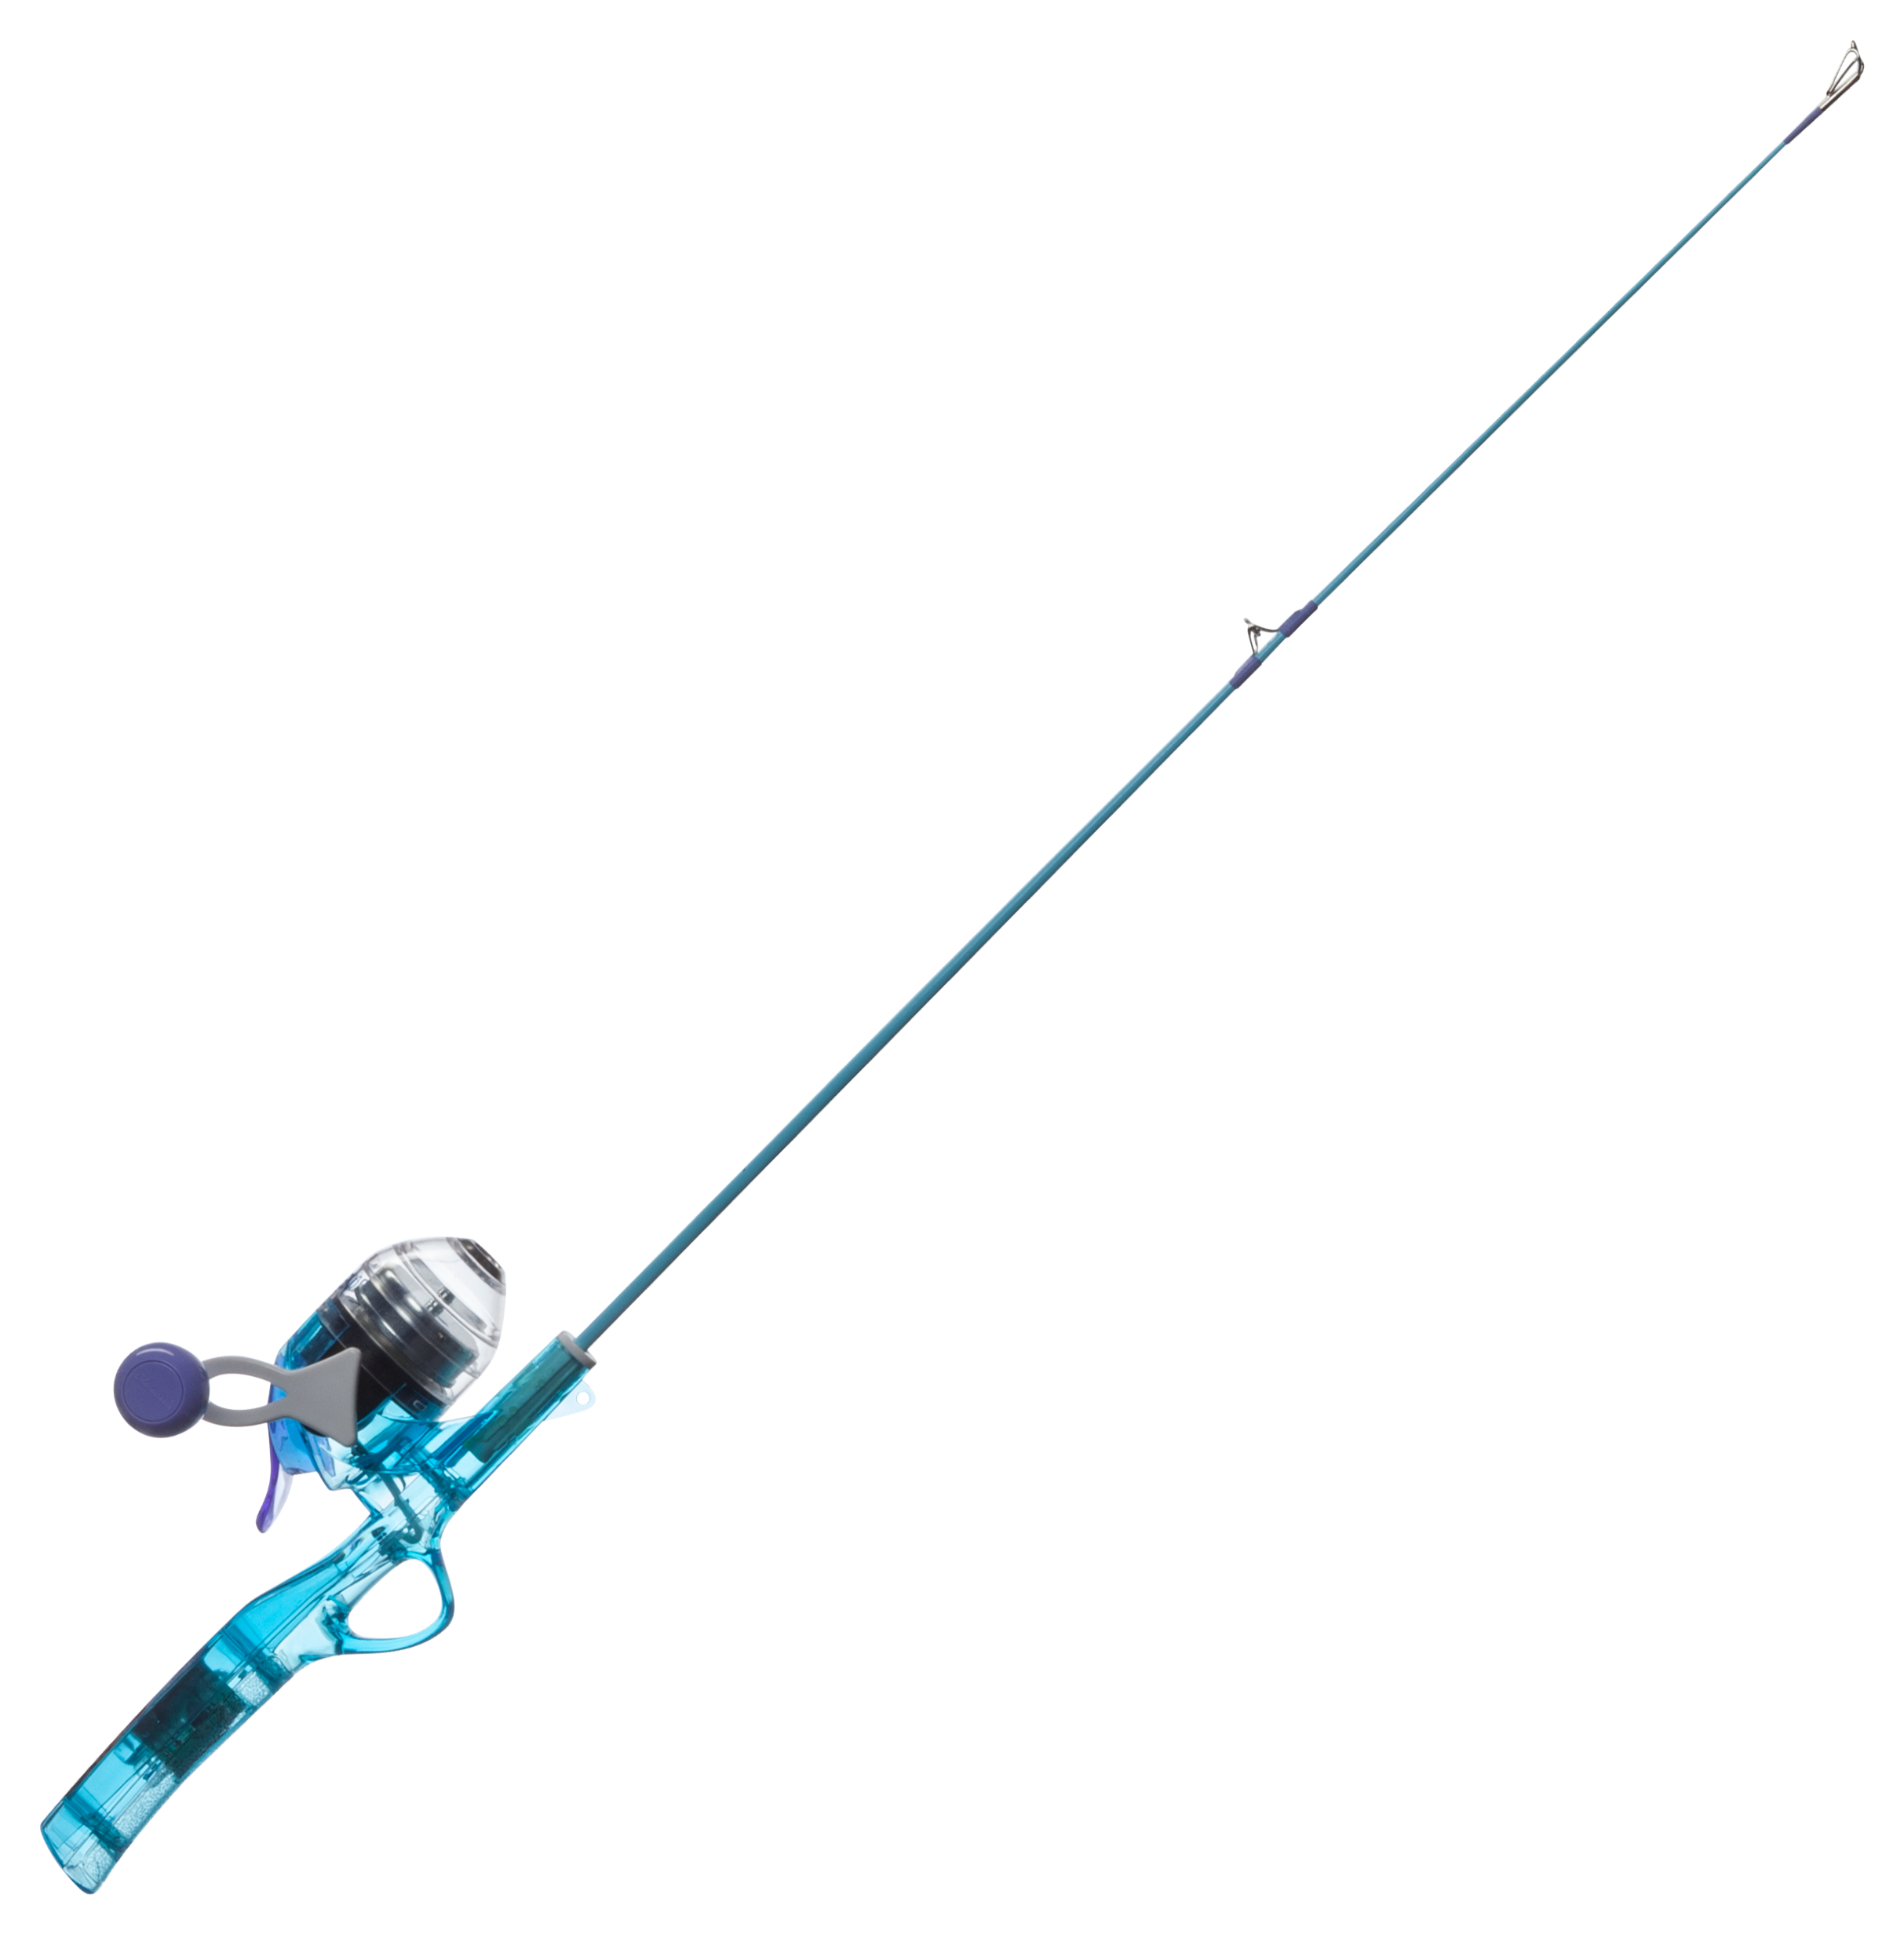 Shakespeare Youth Fishing Rod and Spincast Reel Lighted Kit, Frozen